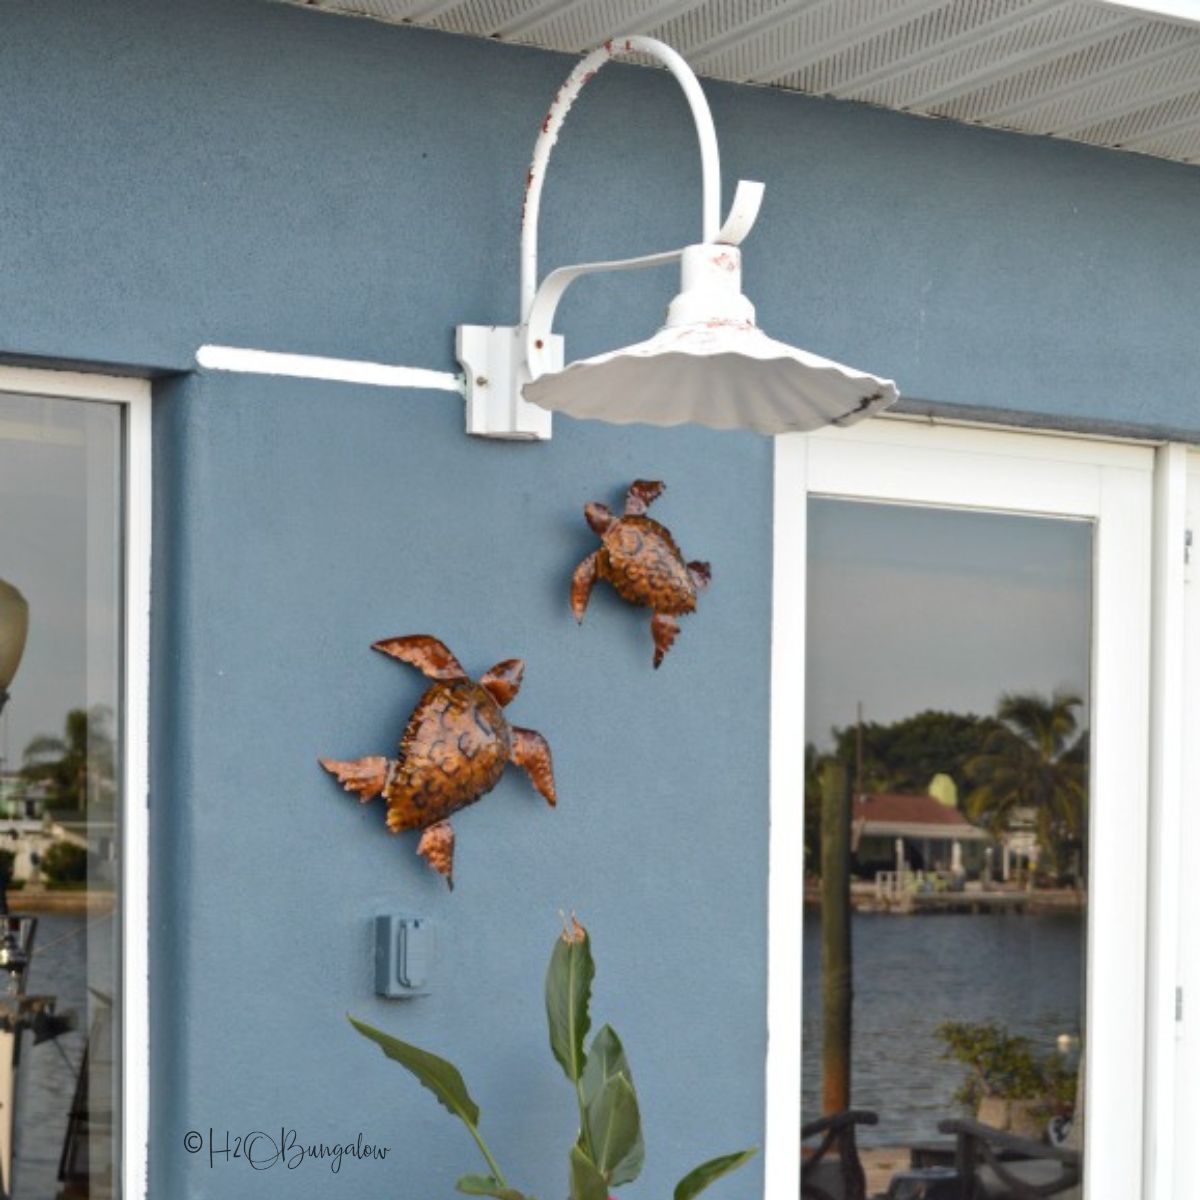 How To Hang Outdoor Wall Decor Without Nails - H2OBungalow